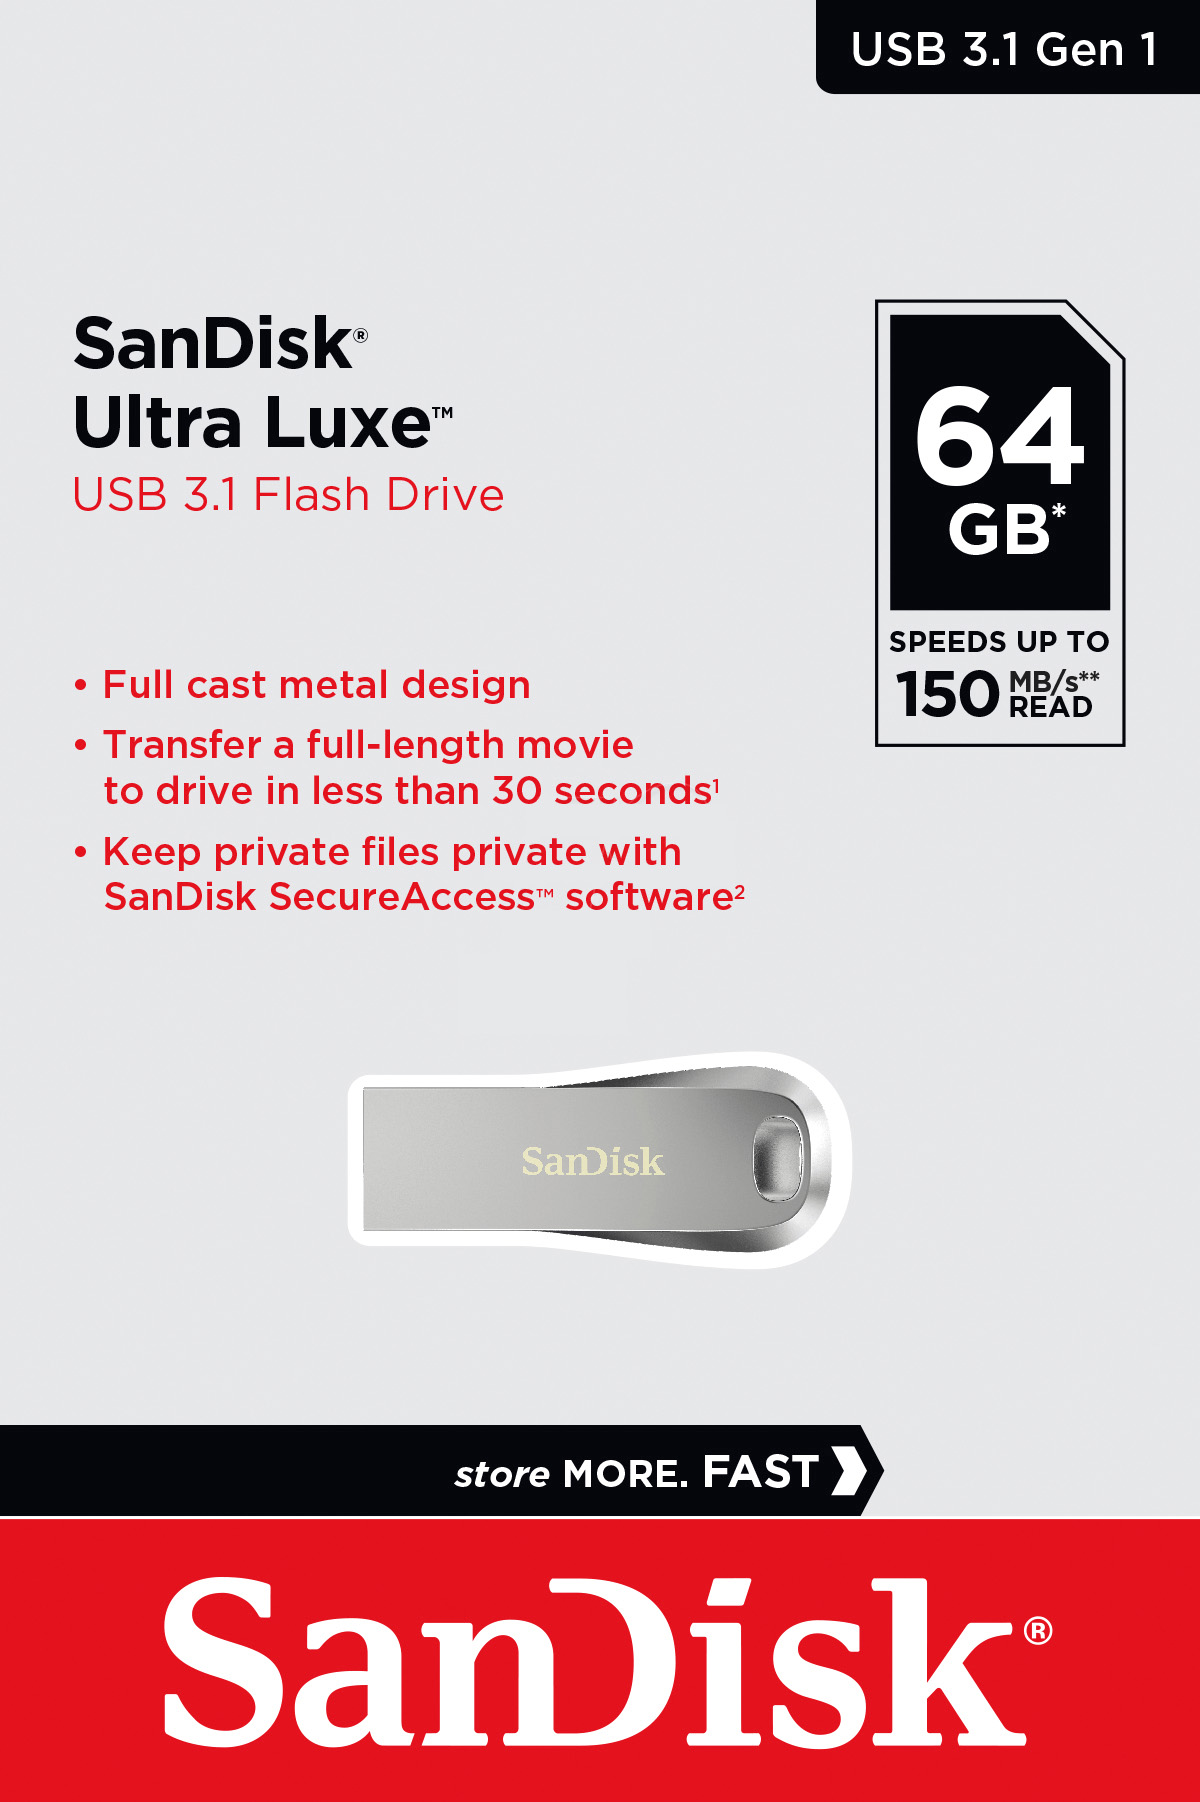 Sandisk USB 3.1 Stick 64GB, Ultra Luxe Typ-A, (R) 150MB/s, SecureAccess, Retail-Blister